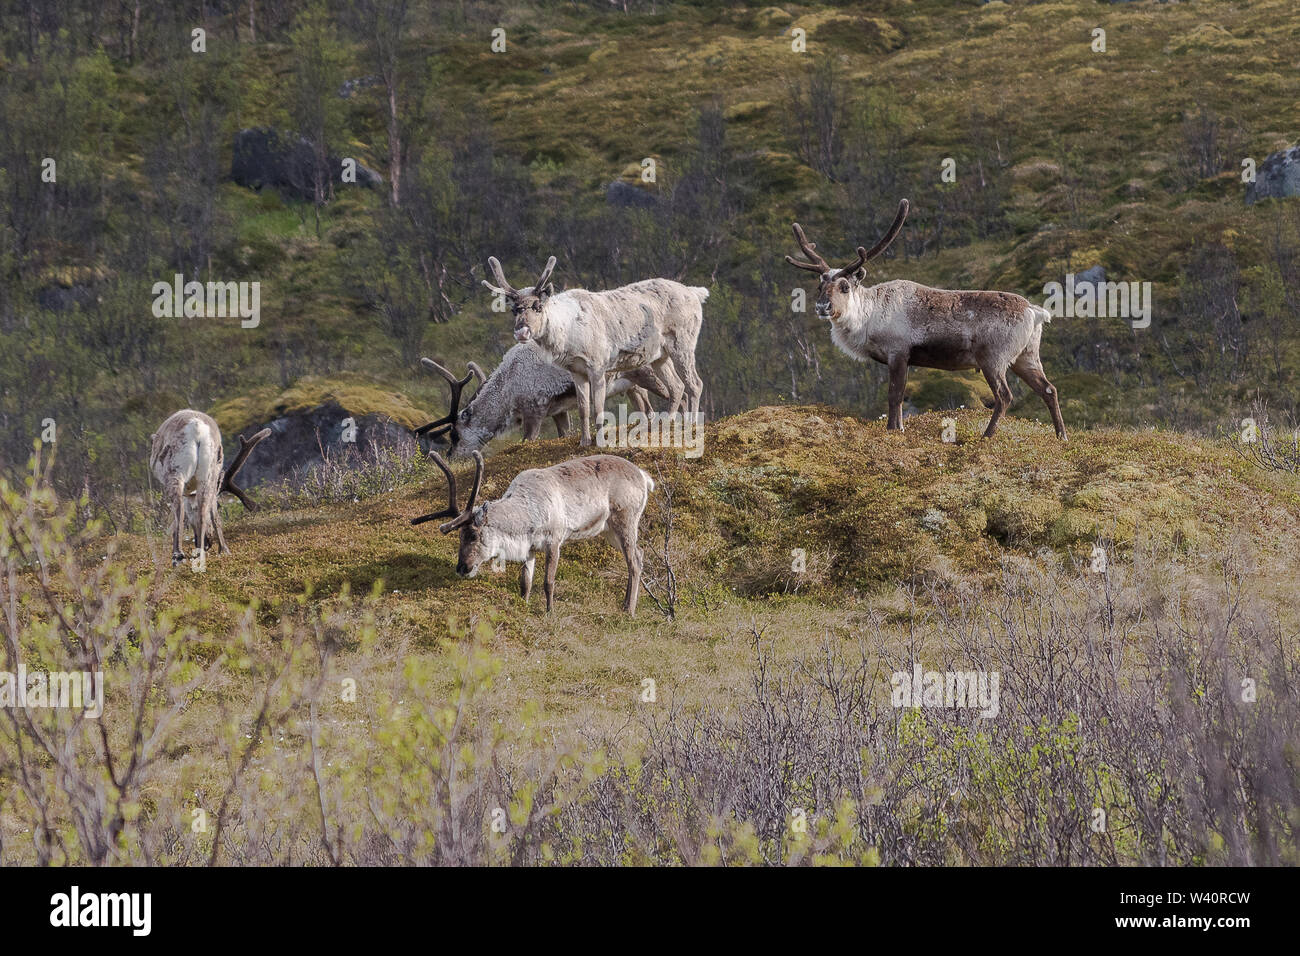 A small herd of wild reindeer roam the tundra on the hills and mountains of the arctic Norwegian island of Senja. Stock Photo